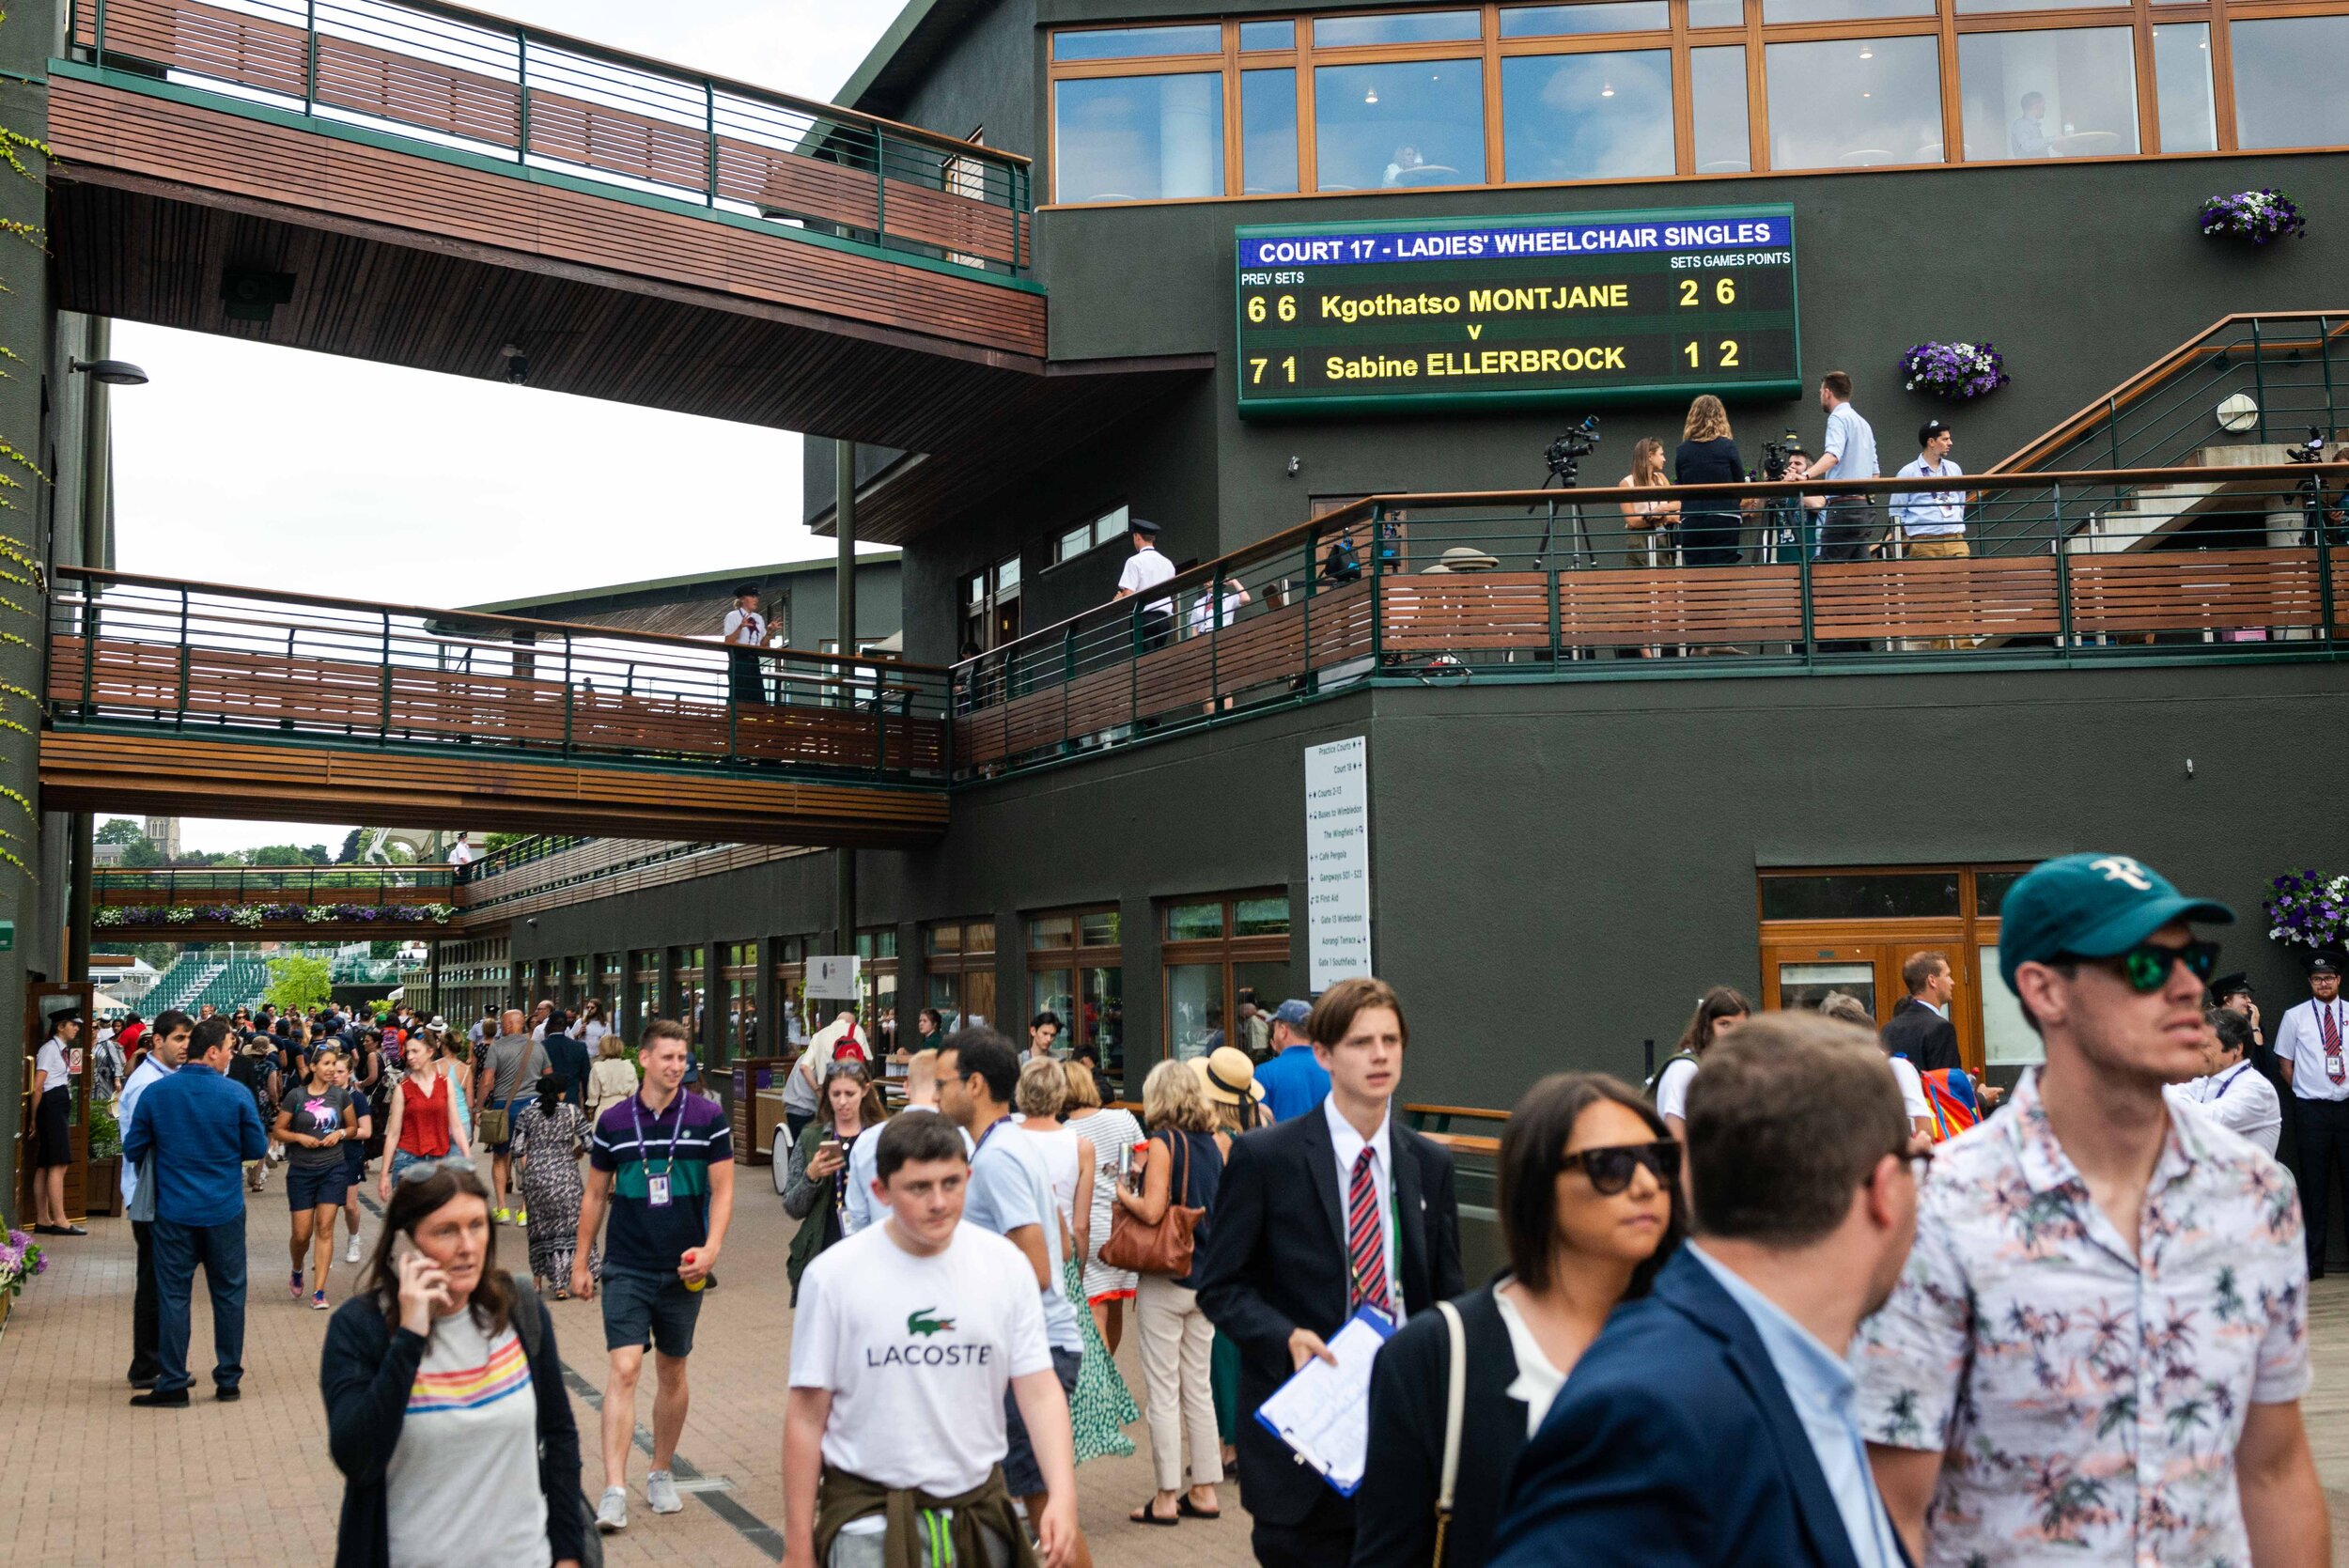  People walk through the area of Wimbledon. The result of the match between Sabine Ellerbrock and Kgothatso Montjane is shown on the display. 